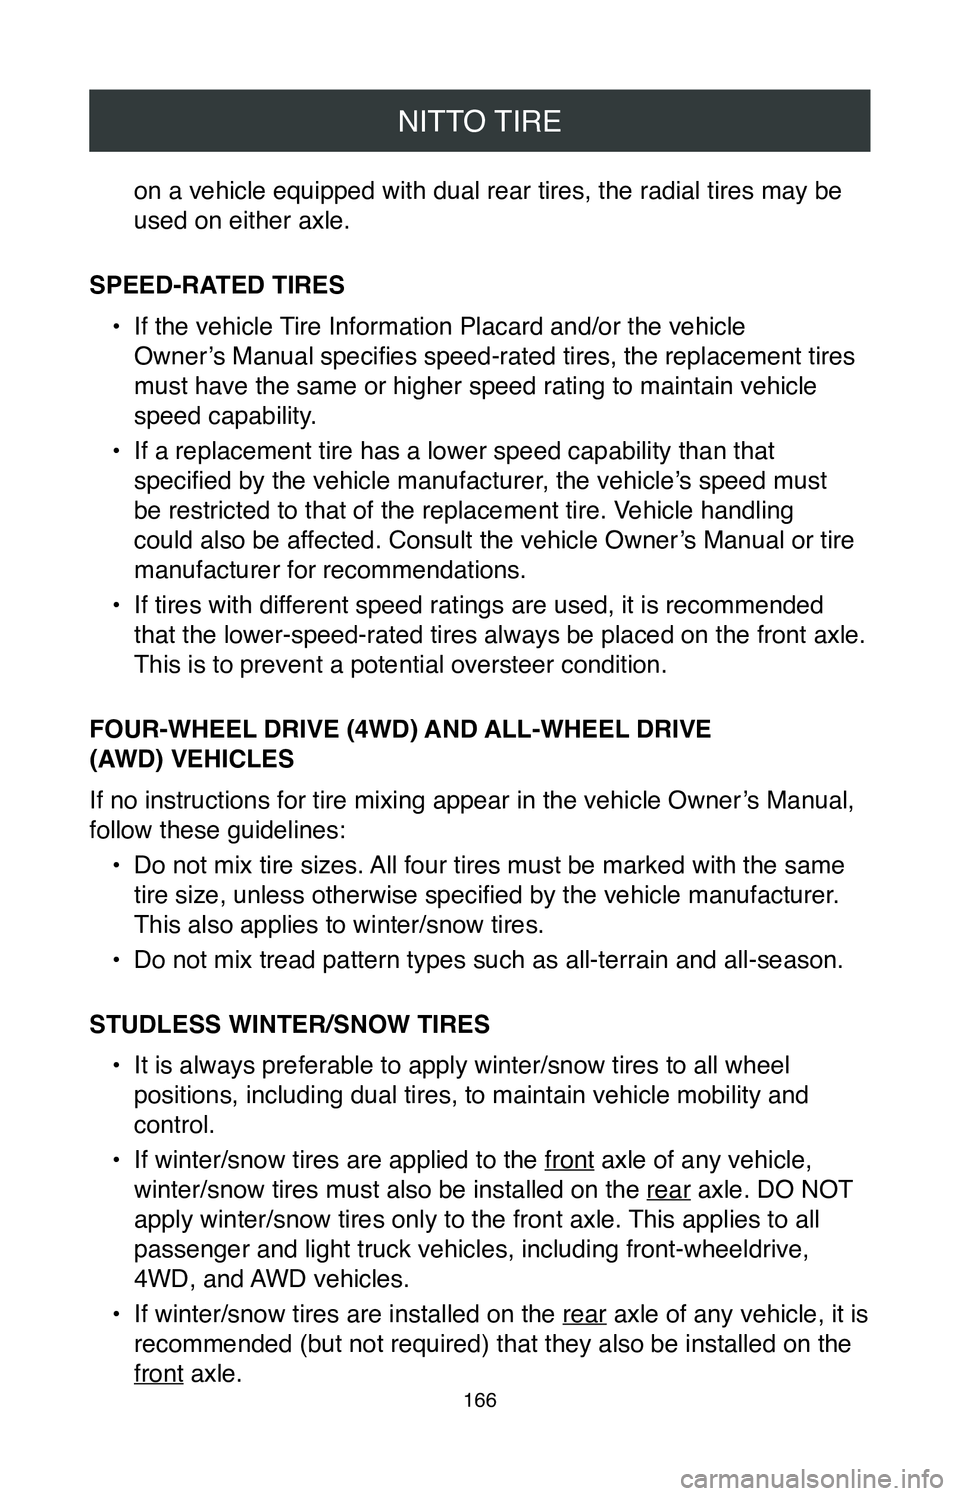 TOYOTA RAV4 2020  Warranties & Maintenance Guides (in English) NITTO TIRE
166
on a vehicle equipped with dual rear tires, the radial tires may be 
used on either axle.
SPEED-RATED TIRES •
 If the vehicle Tire Information Placard and/or the vehicle  
Owner’s M